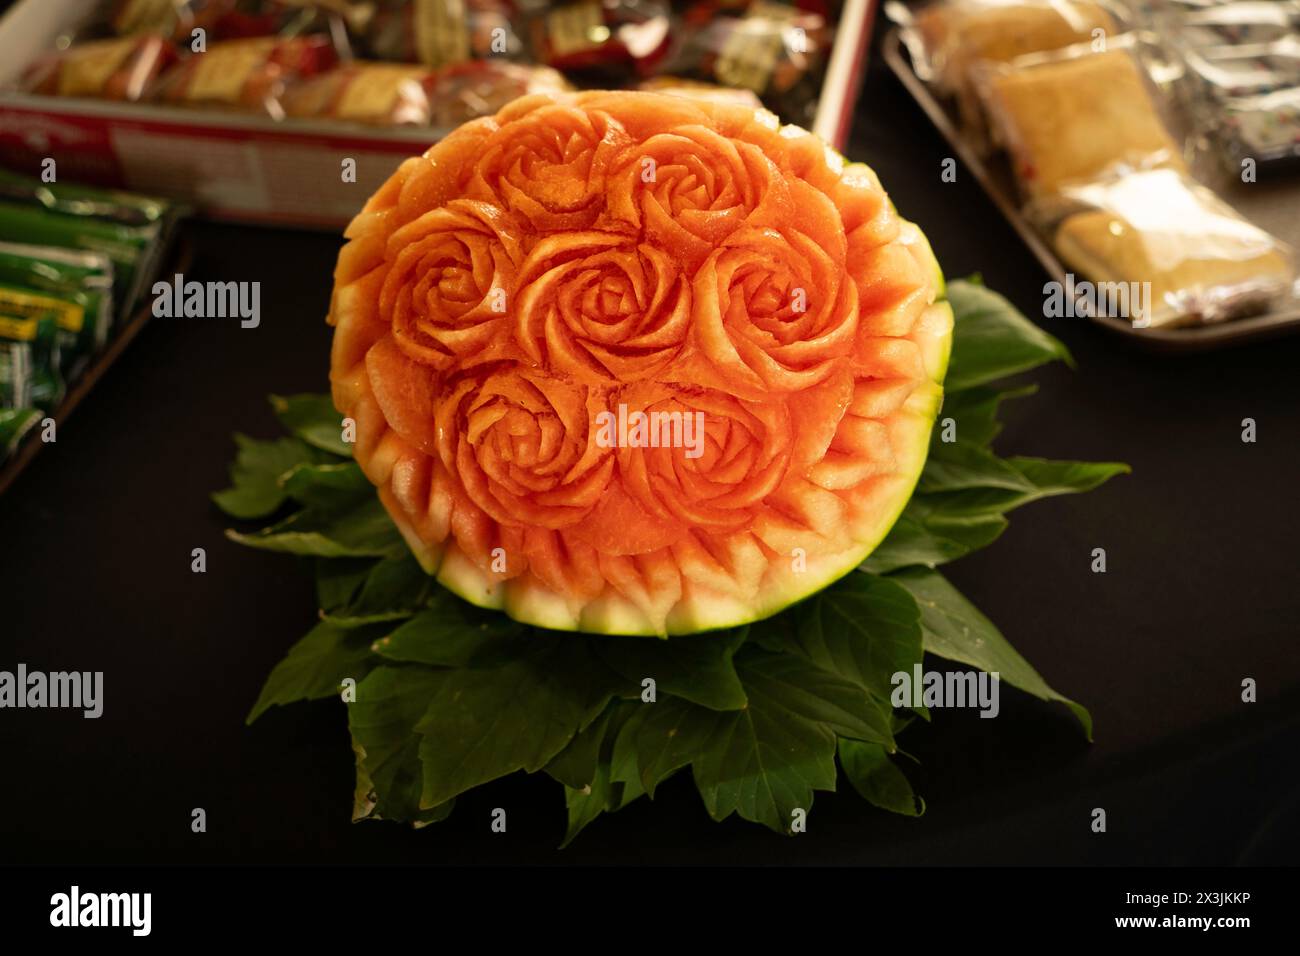 A watermelon carving of a boquet of roses sits on a black table with package snacks placed around it. Stock Photo